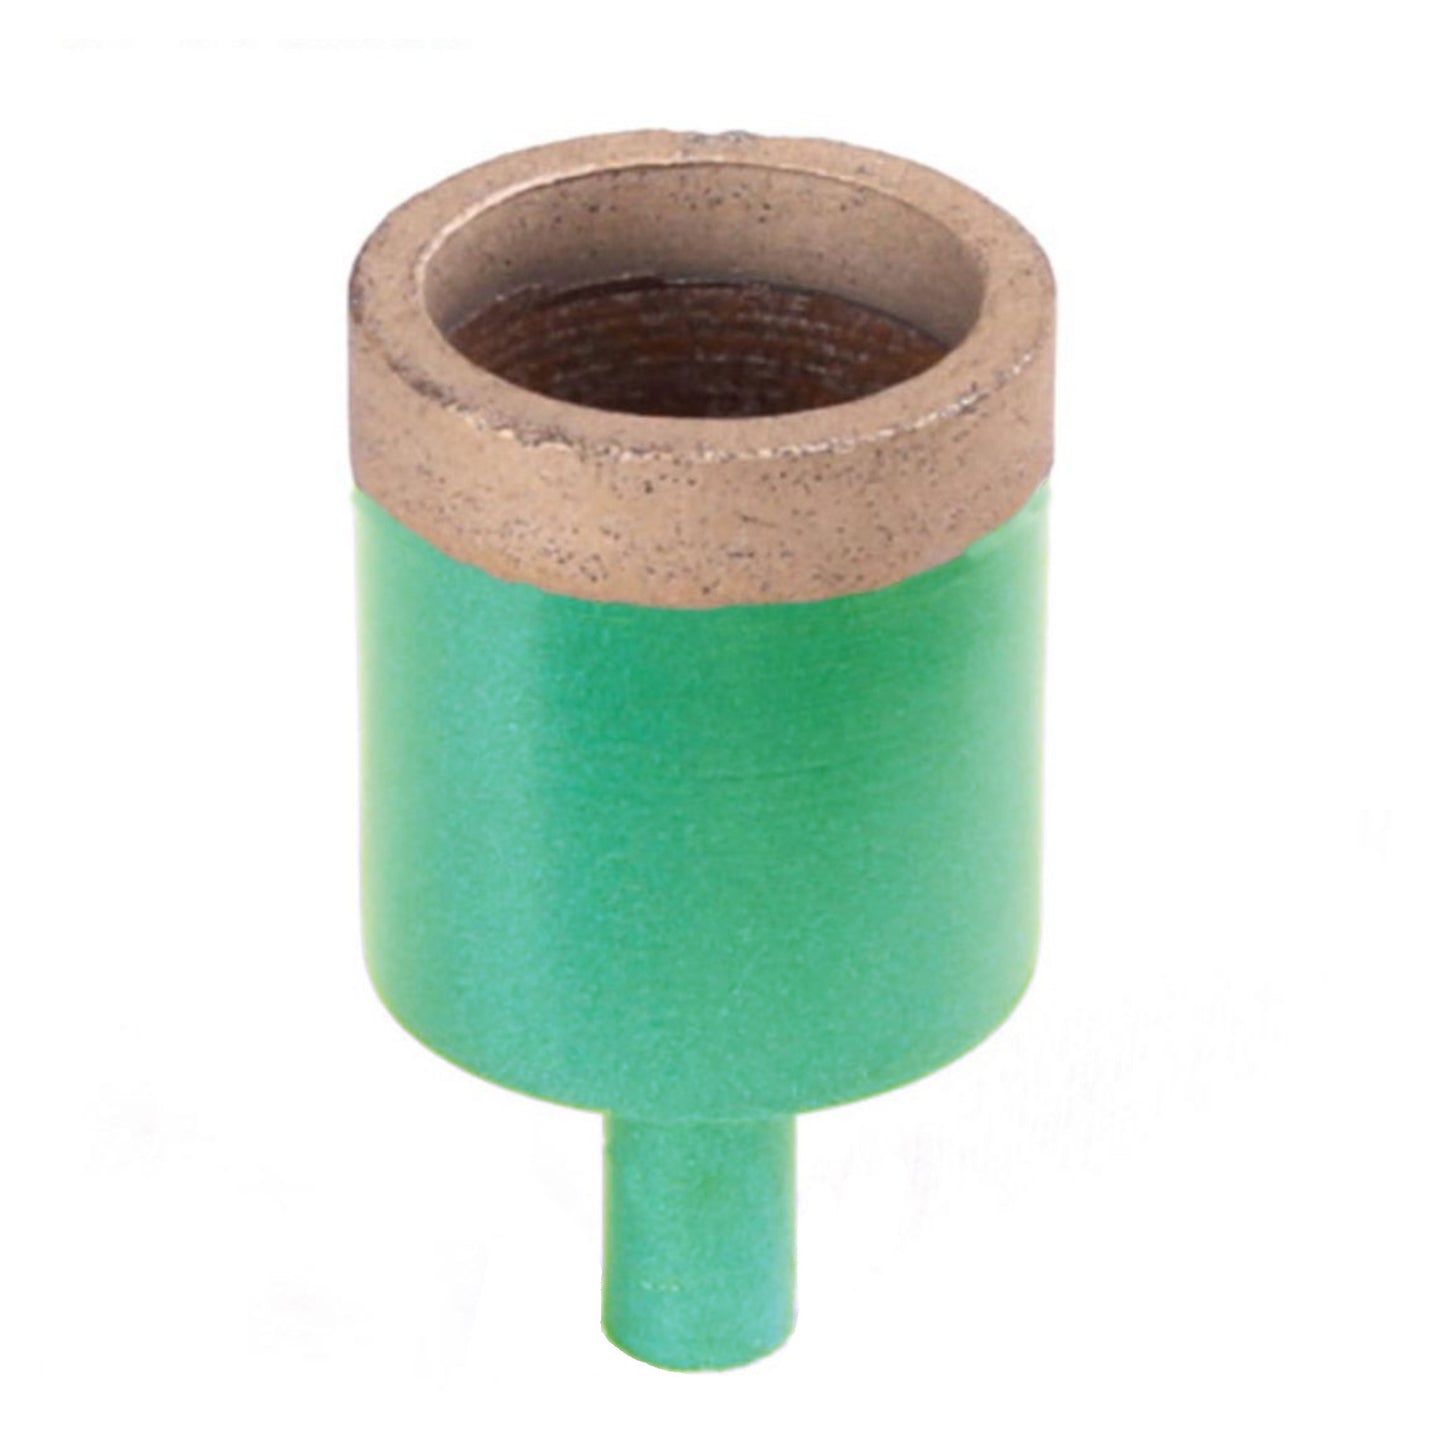 13mm - Grinding Cup